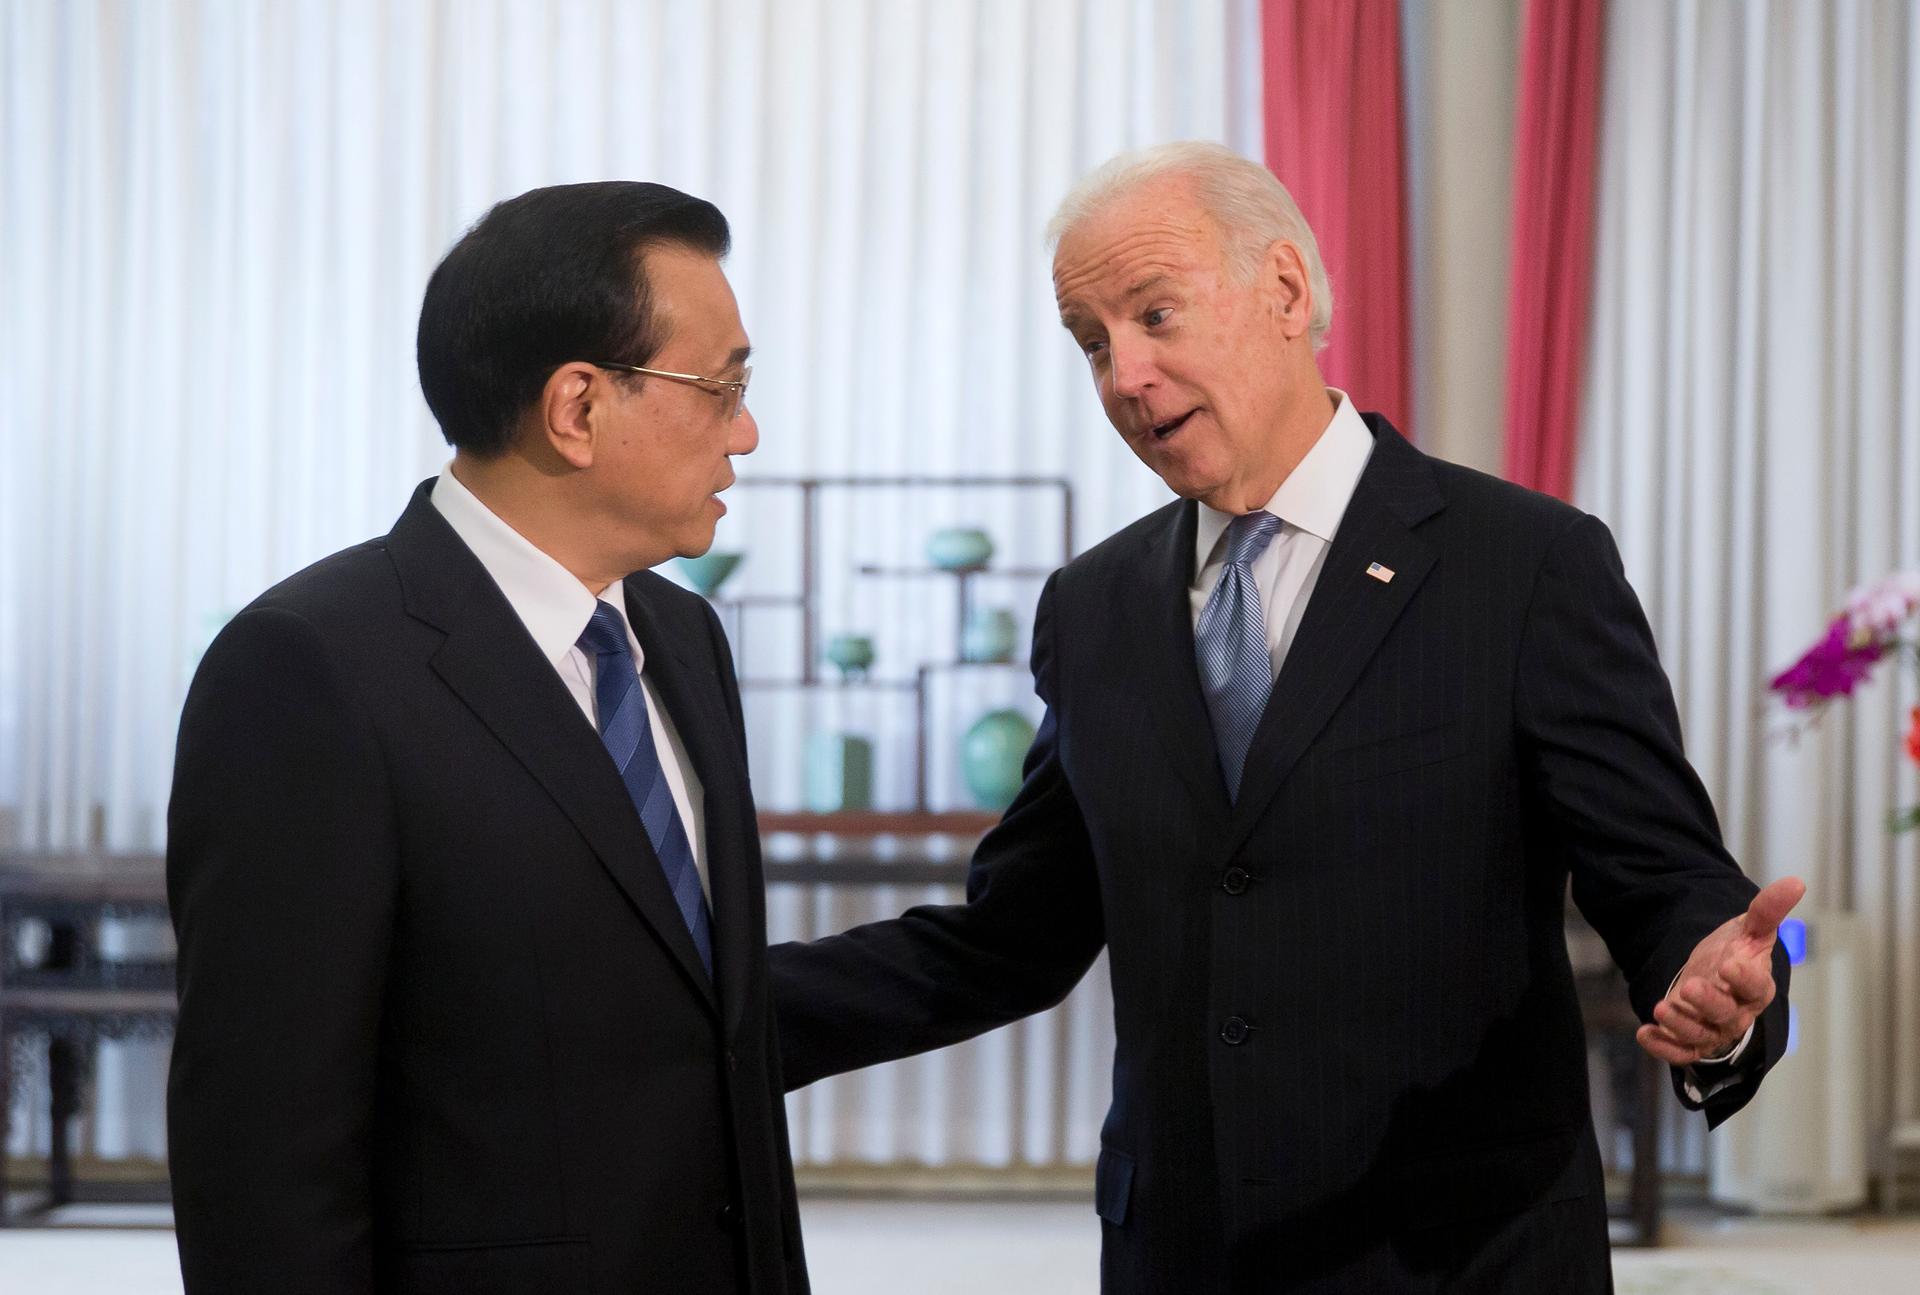 U.S. Vice President Joe Biden chats with Chinese Premier Li Keqiang in Beijing on December 5, 2013. Biden raised the issue of press freedom with China.  